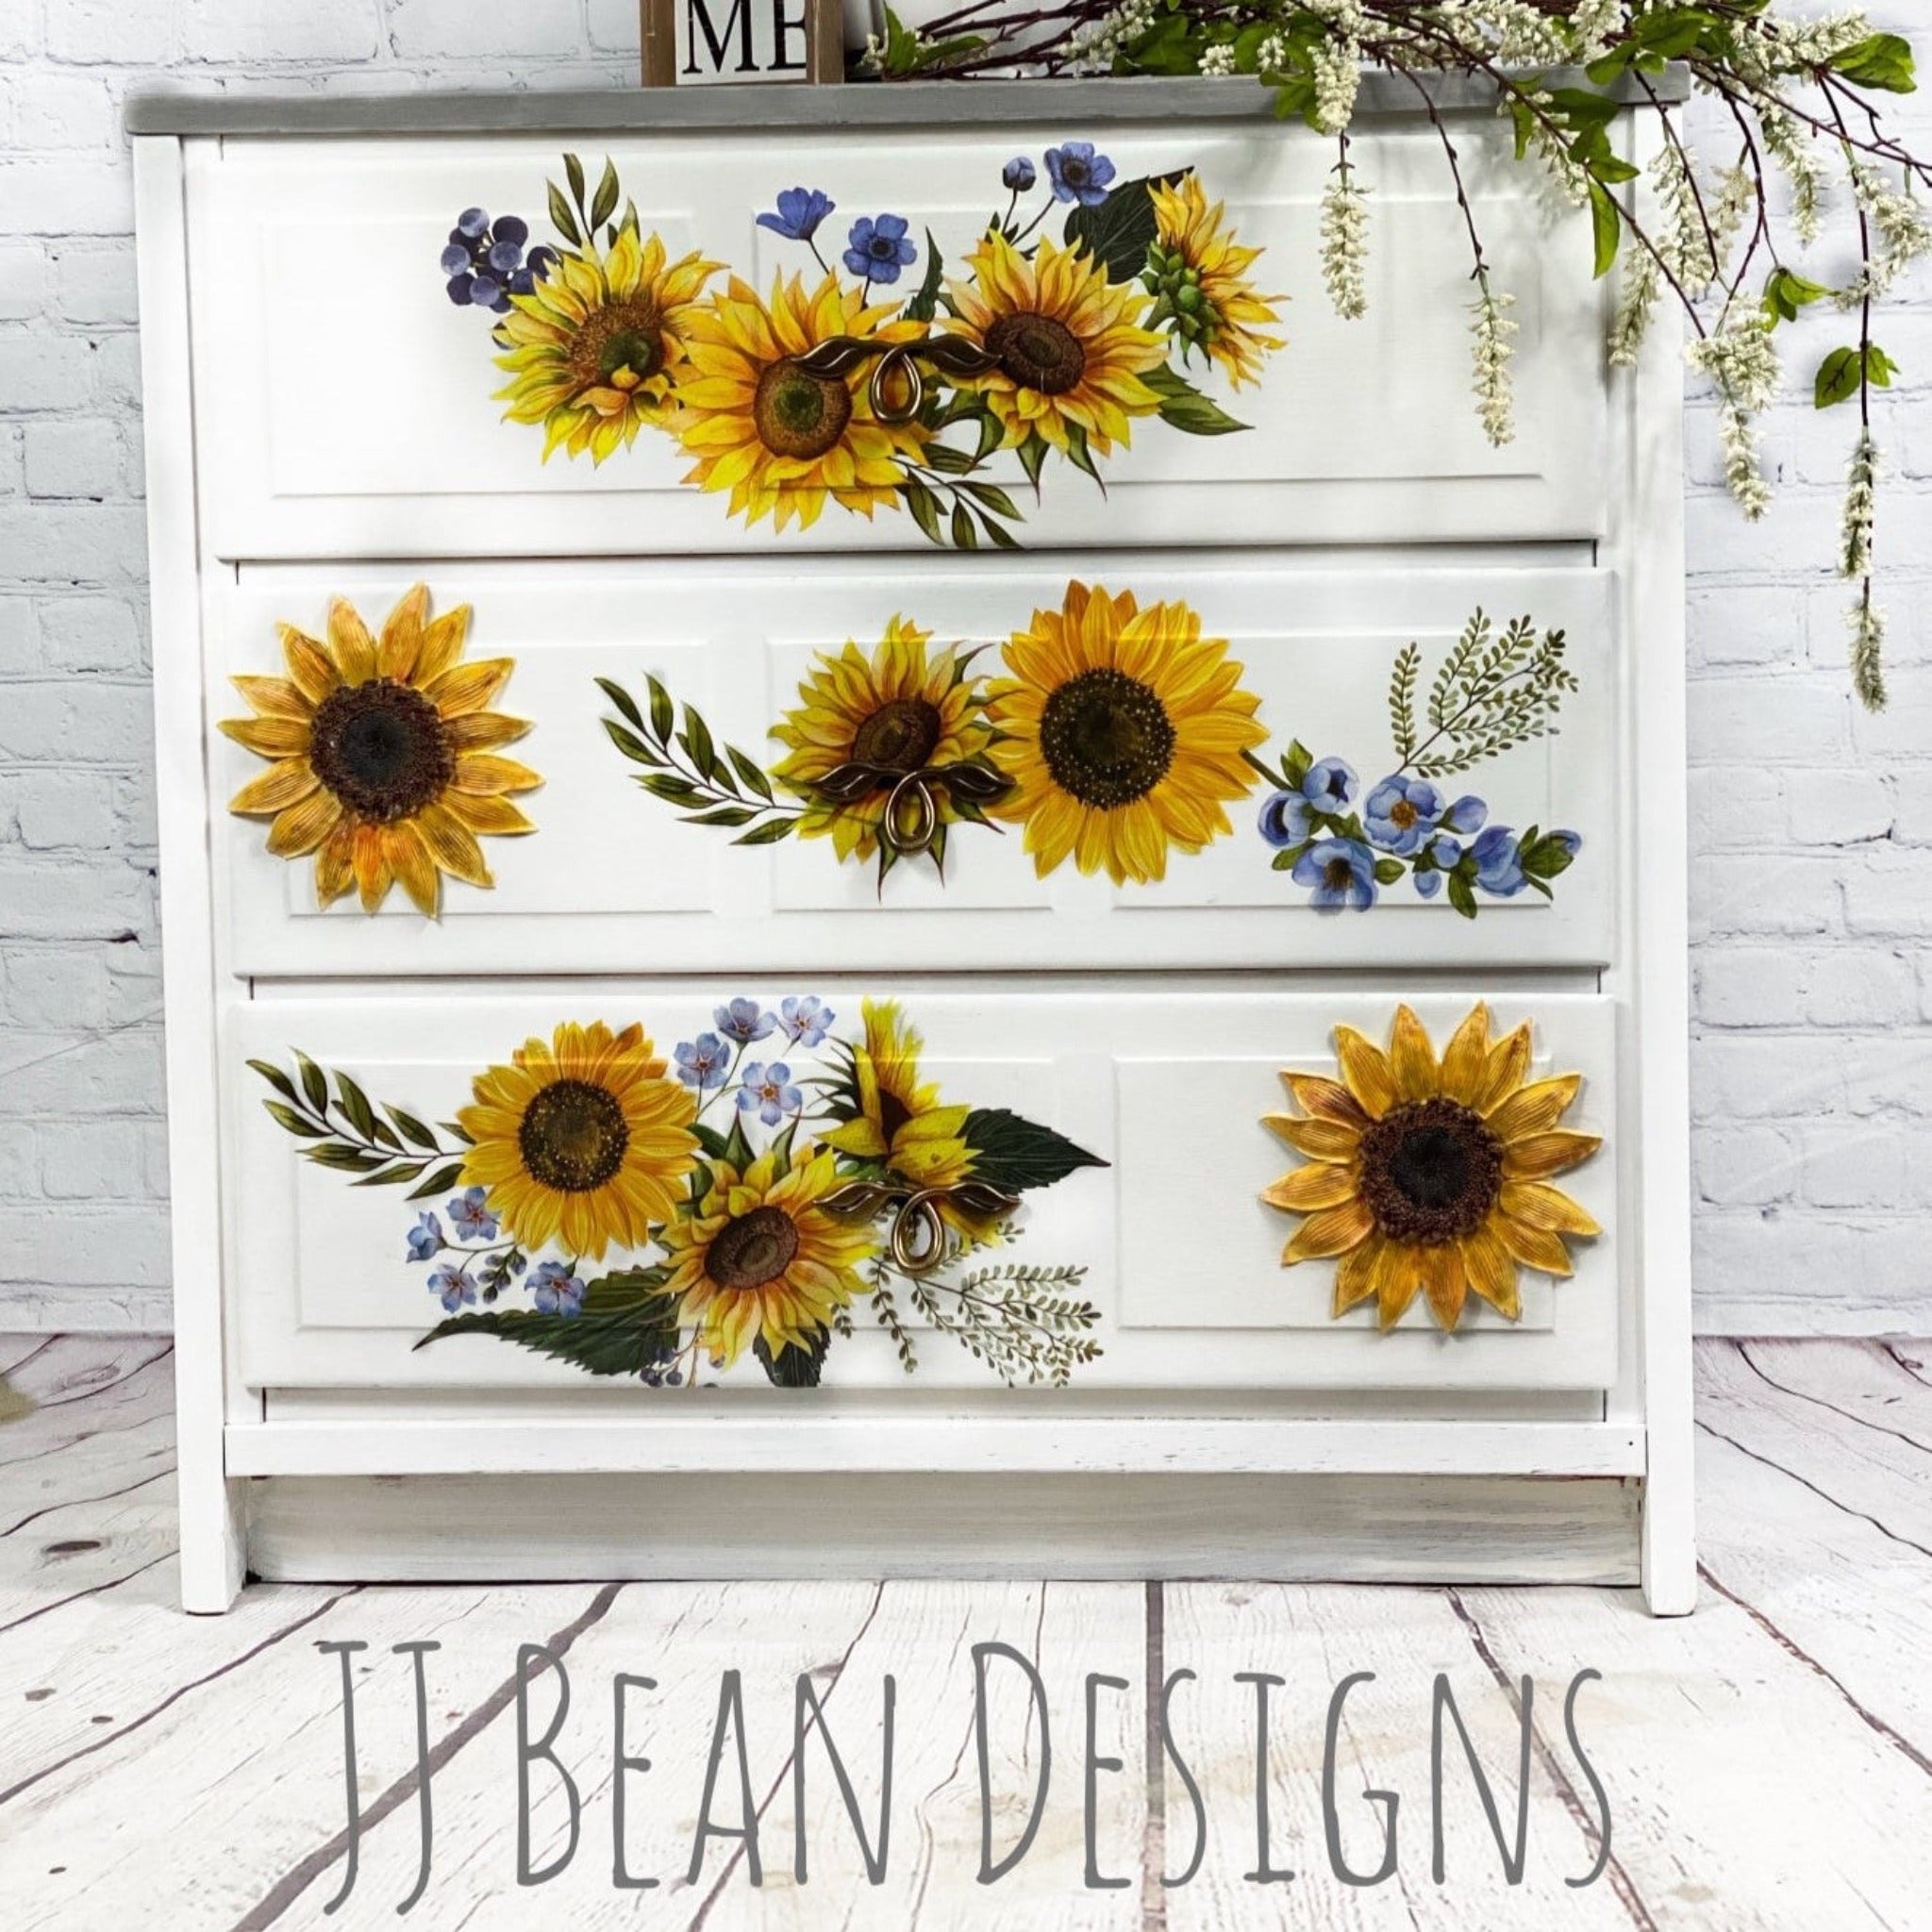 A 3-drawer dresser refurbished by JJ Bean Designs is painted white and features ReDesign with Prima's Sunflower Fields transfer on the drawers.